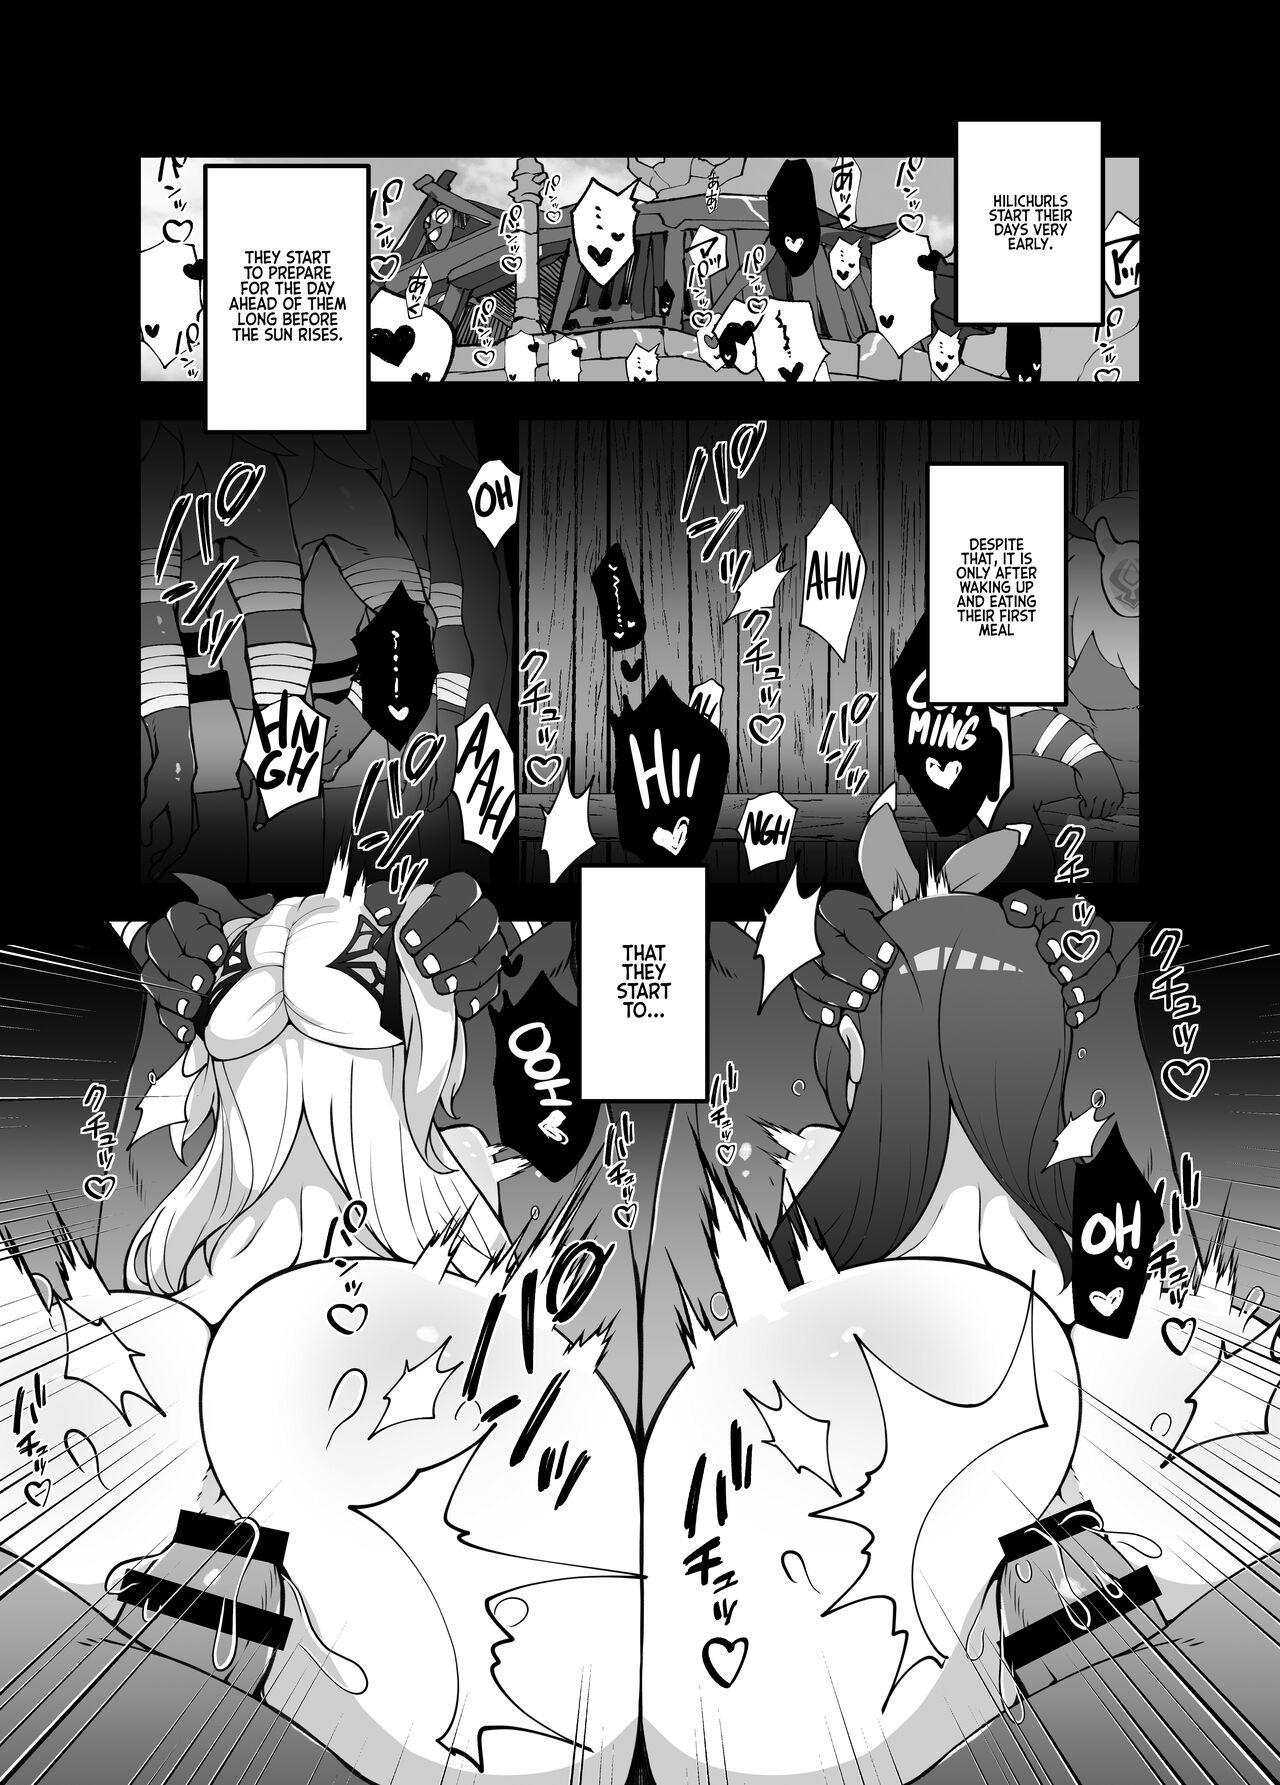 Hotporn [Karouke (Karou)] The Attack of the Hilichurls II ~The Invasion's Prelude~ Noelle,Chivalric Blossom that withered~ (Genshin Impact) [English] [Kyuume] [Digital] - Genshin impact Spy - Page 3